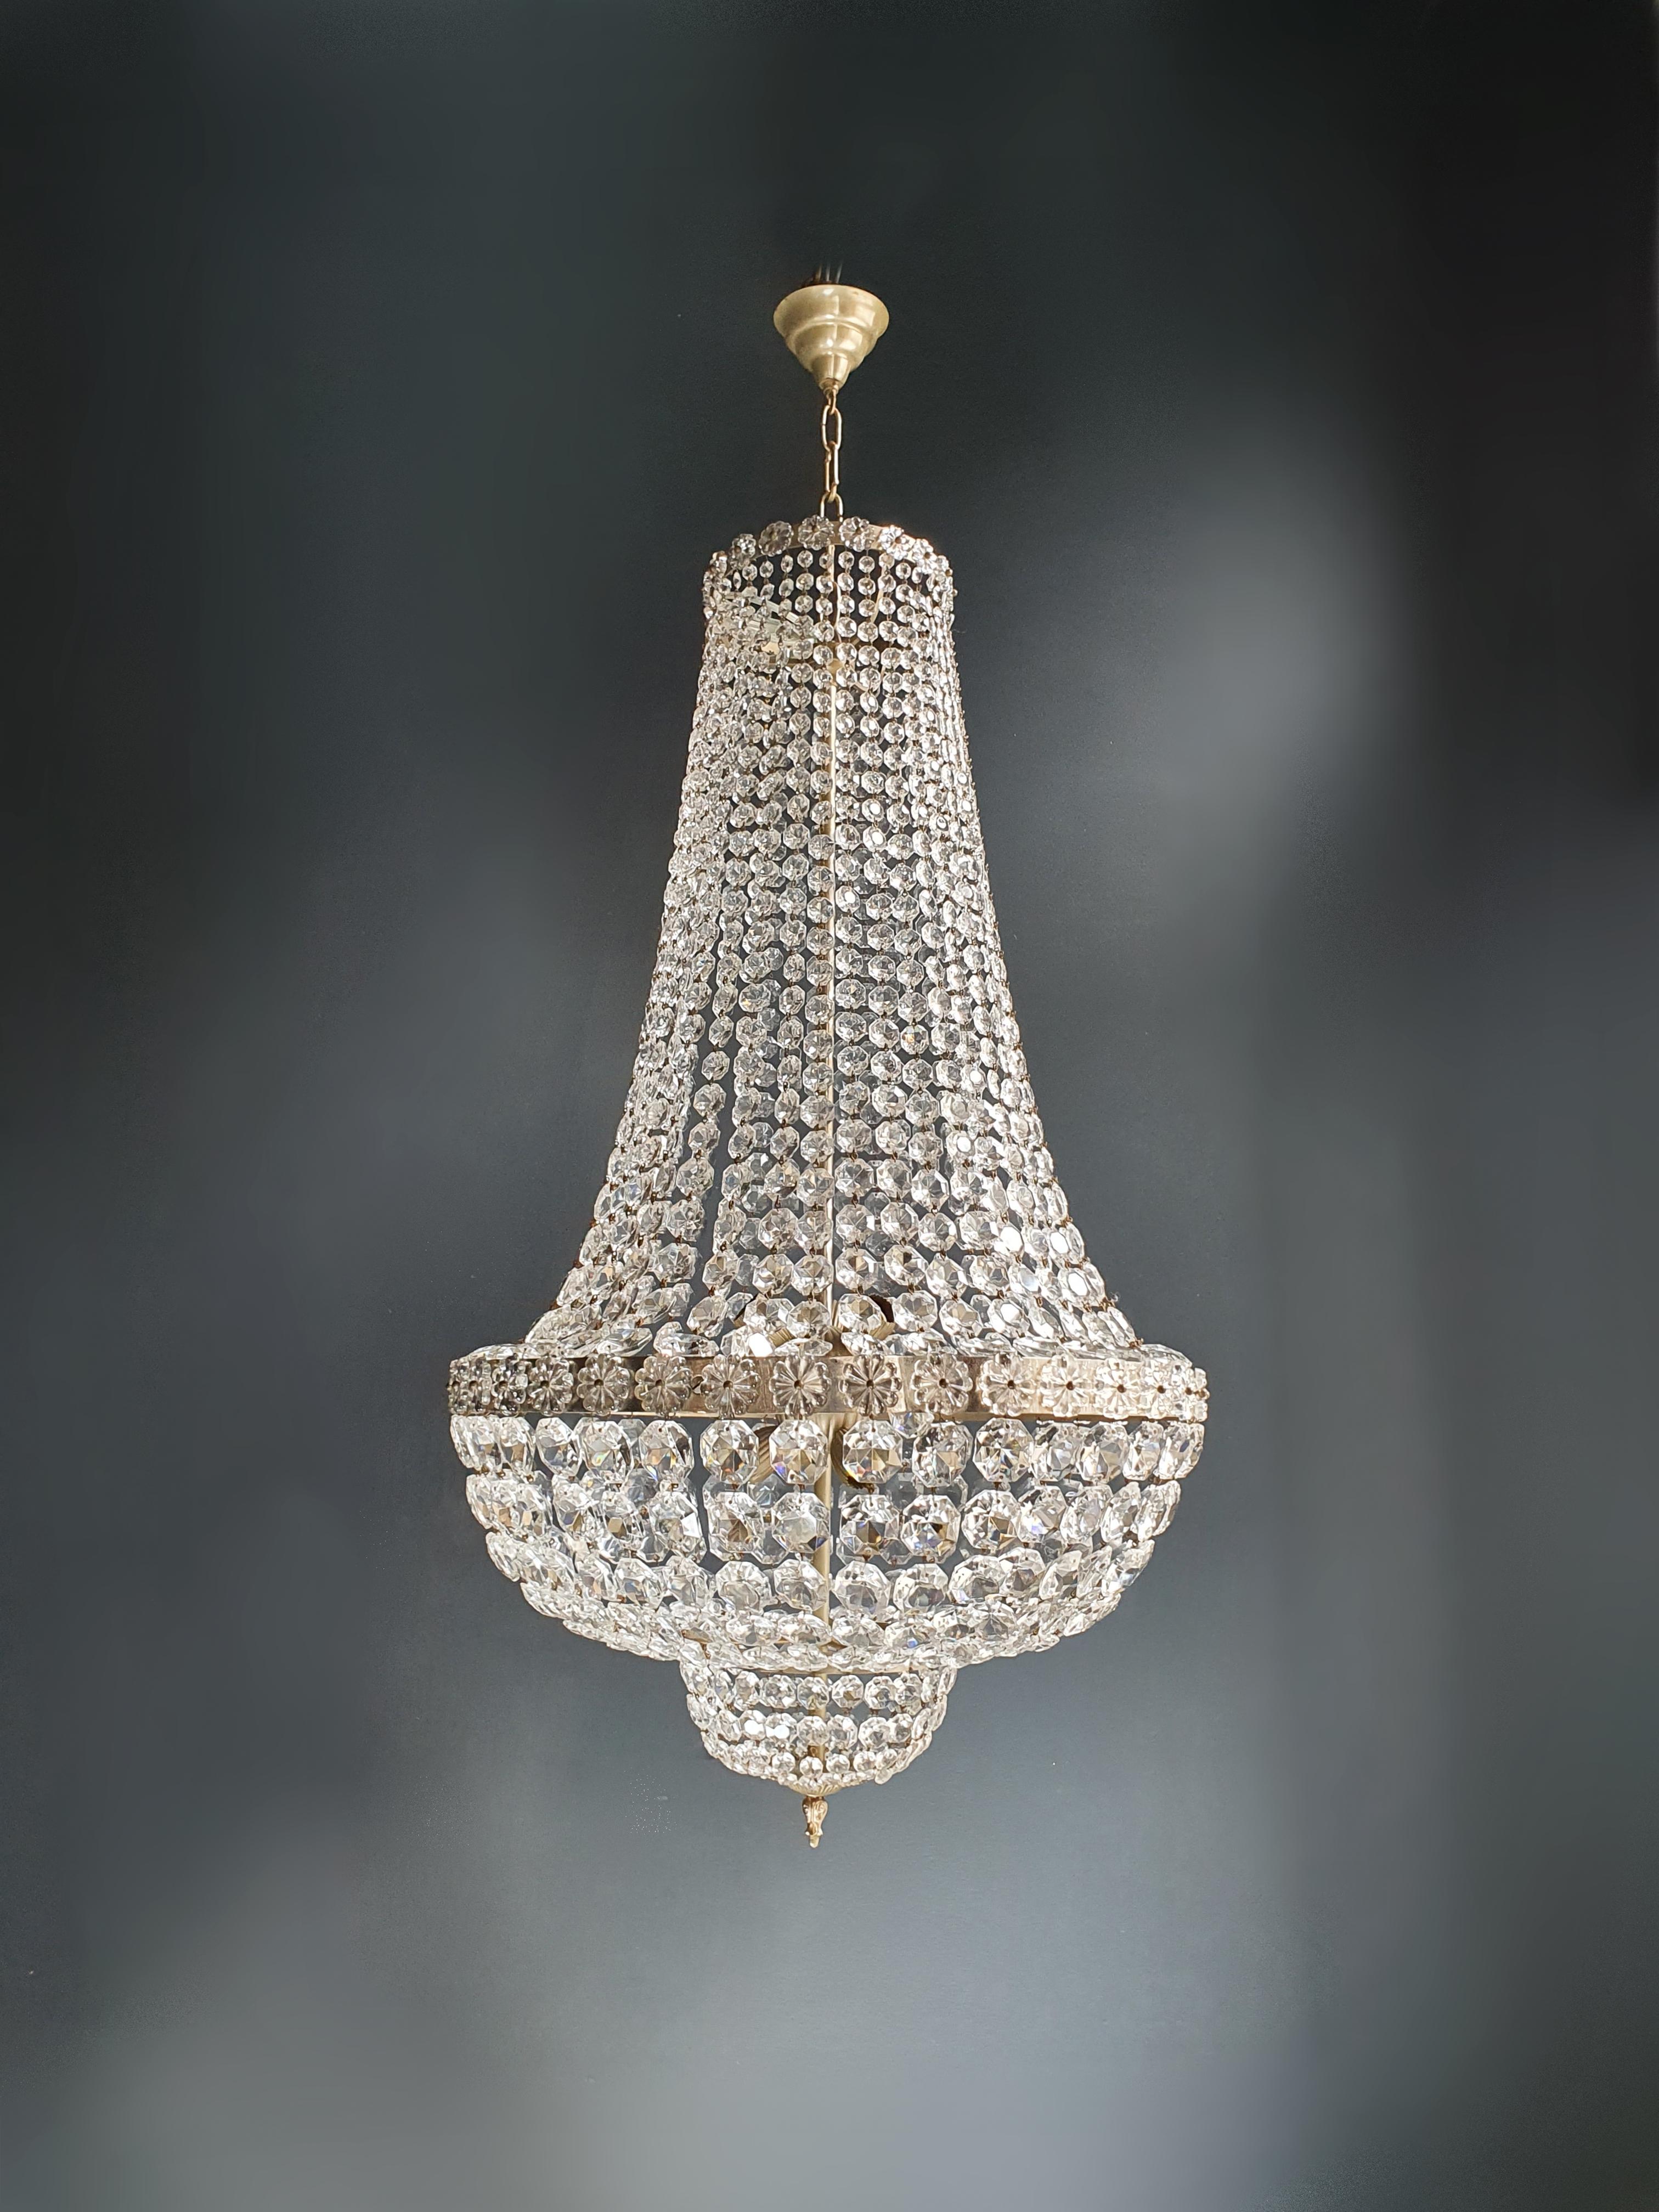 18th Century and Earlier Fine Brass Empire Chandelier Crystal Sac a Pearl Silver Chrome Art Deco Classic